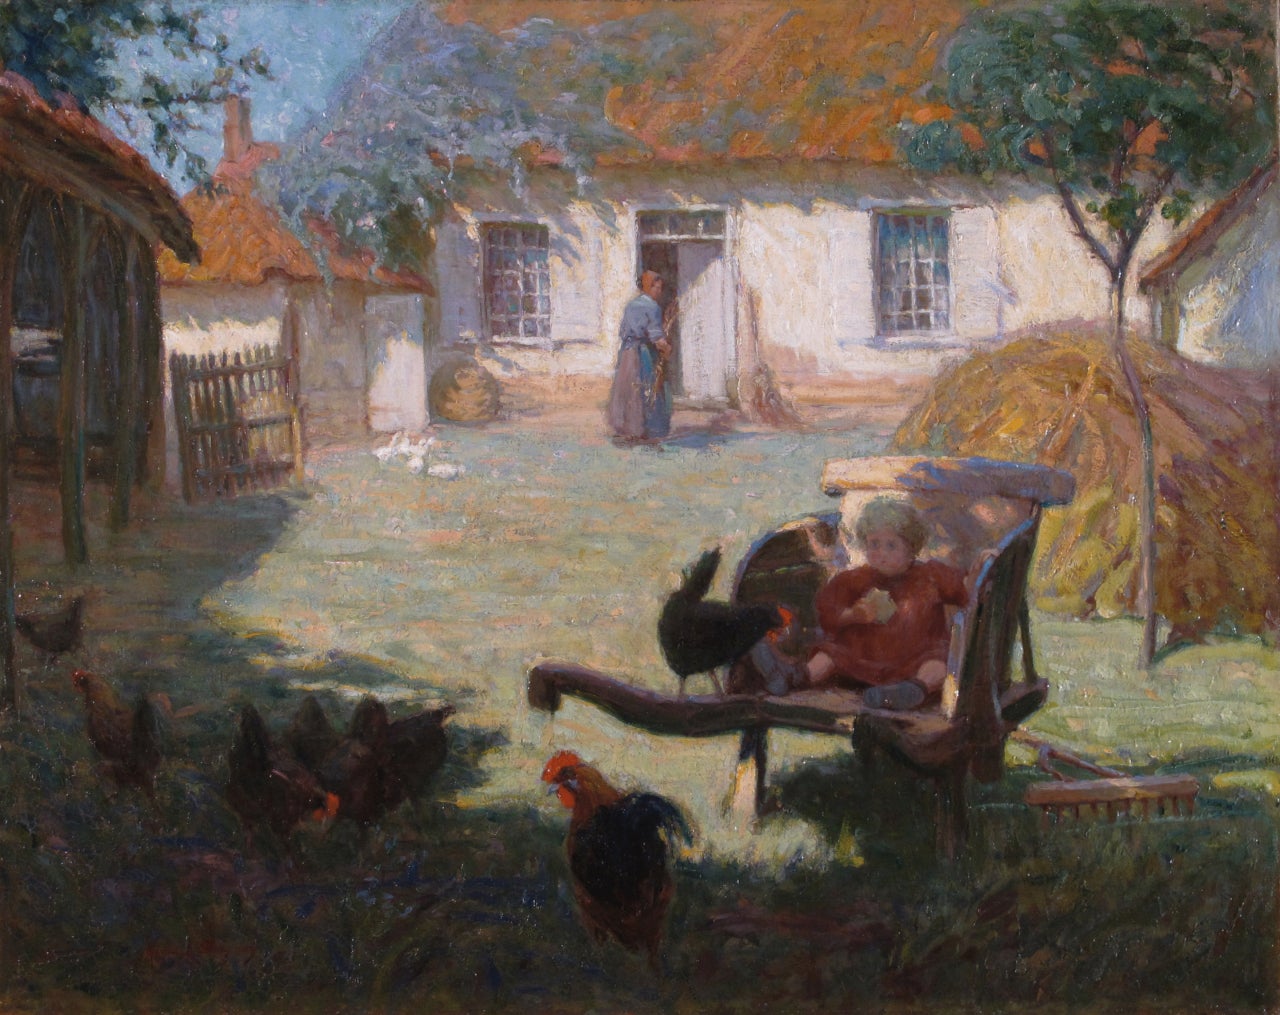 Annie L. Simpson Portrait Painting - Farmyard scene with chickens and child. Signed Oil on Canvas by Annie L Simpson